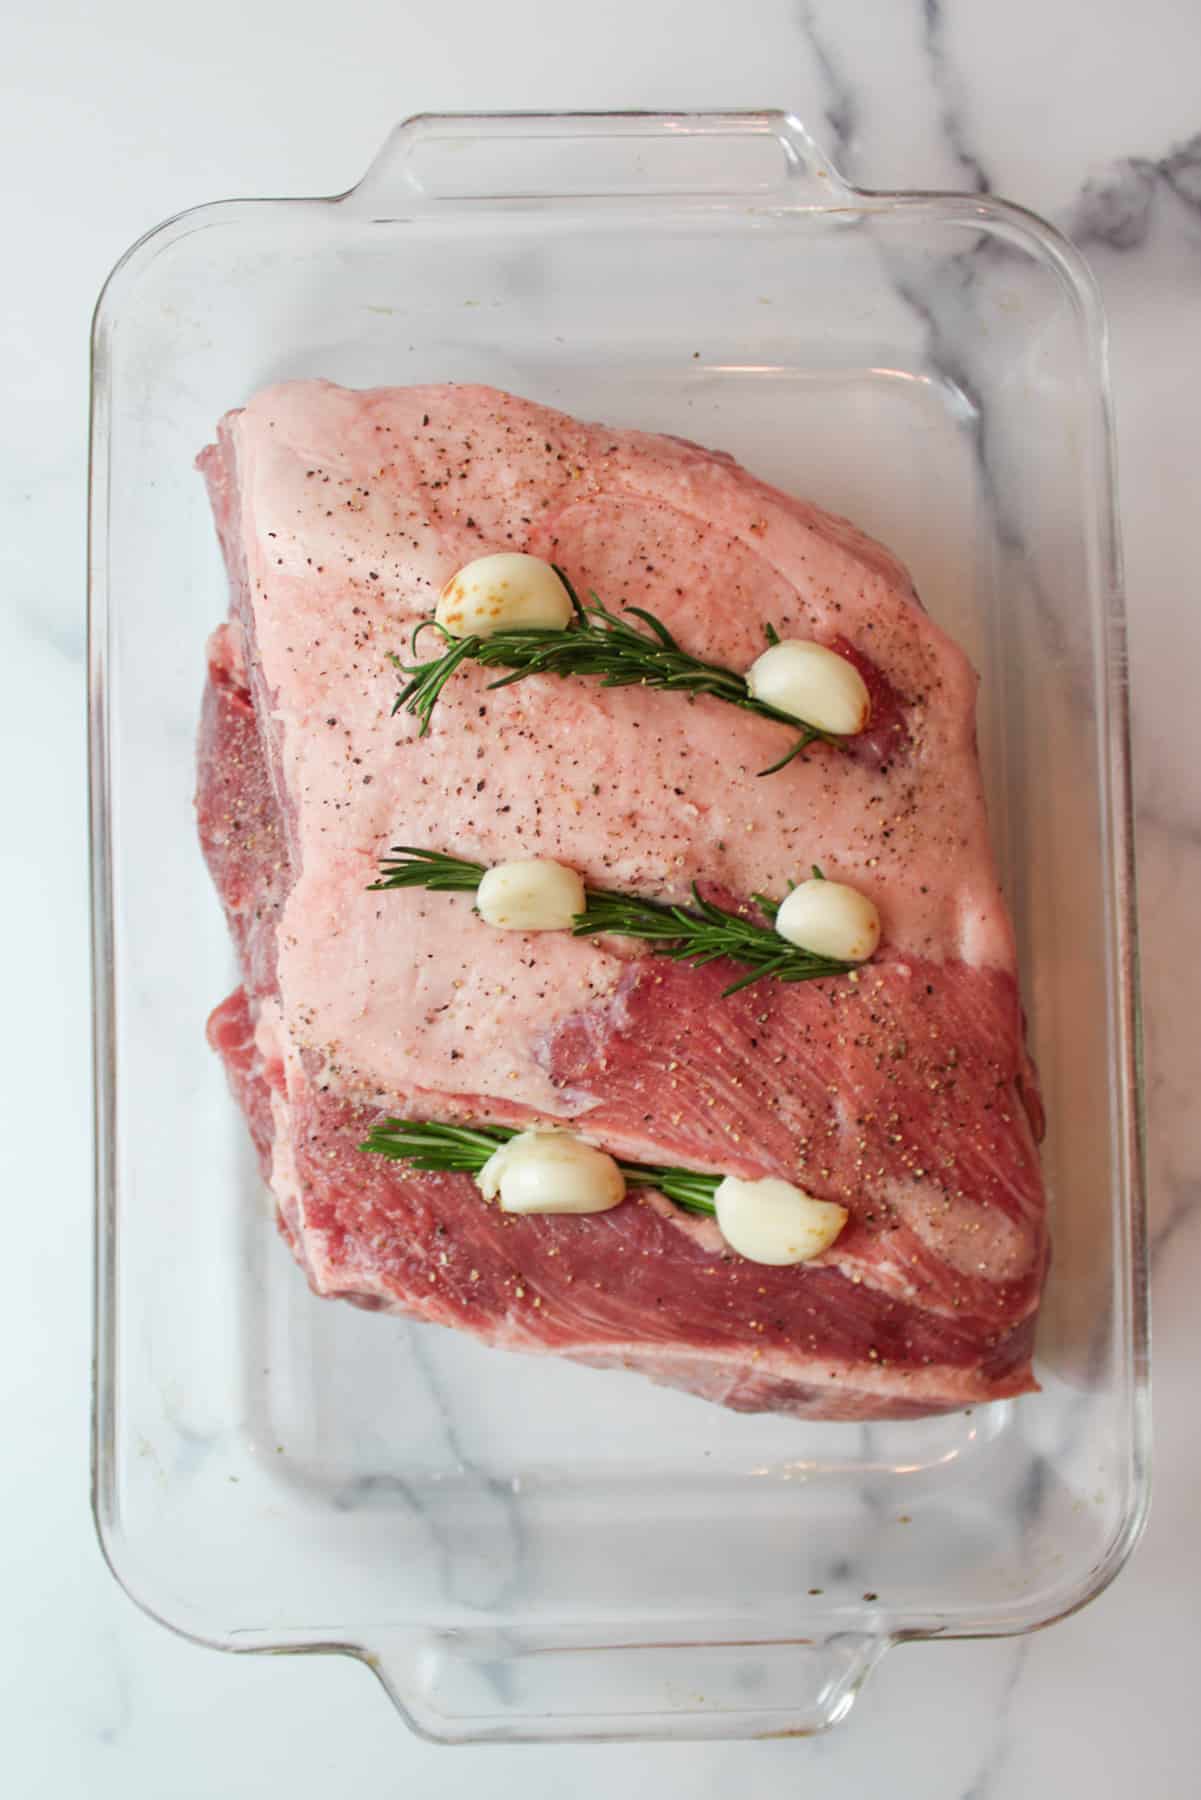 fresh rosemary and garlic cloves tucked into three slits cut into a pork shoulder roast in a baking dish.